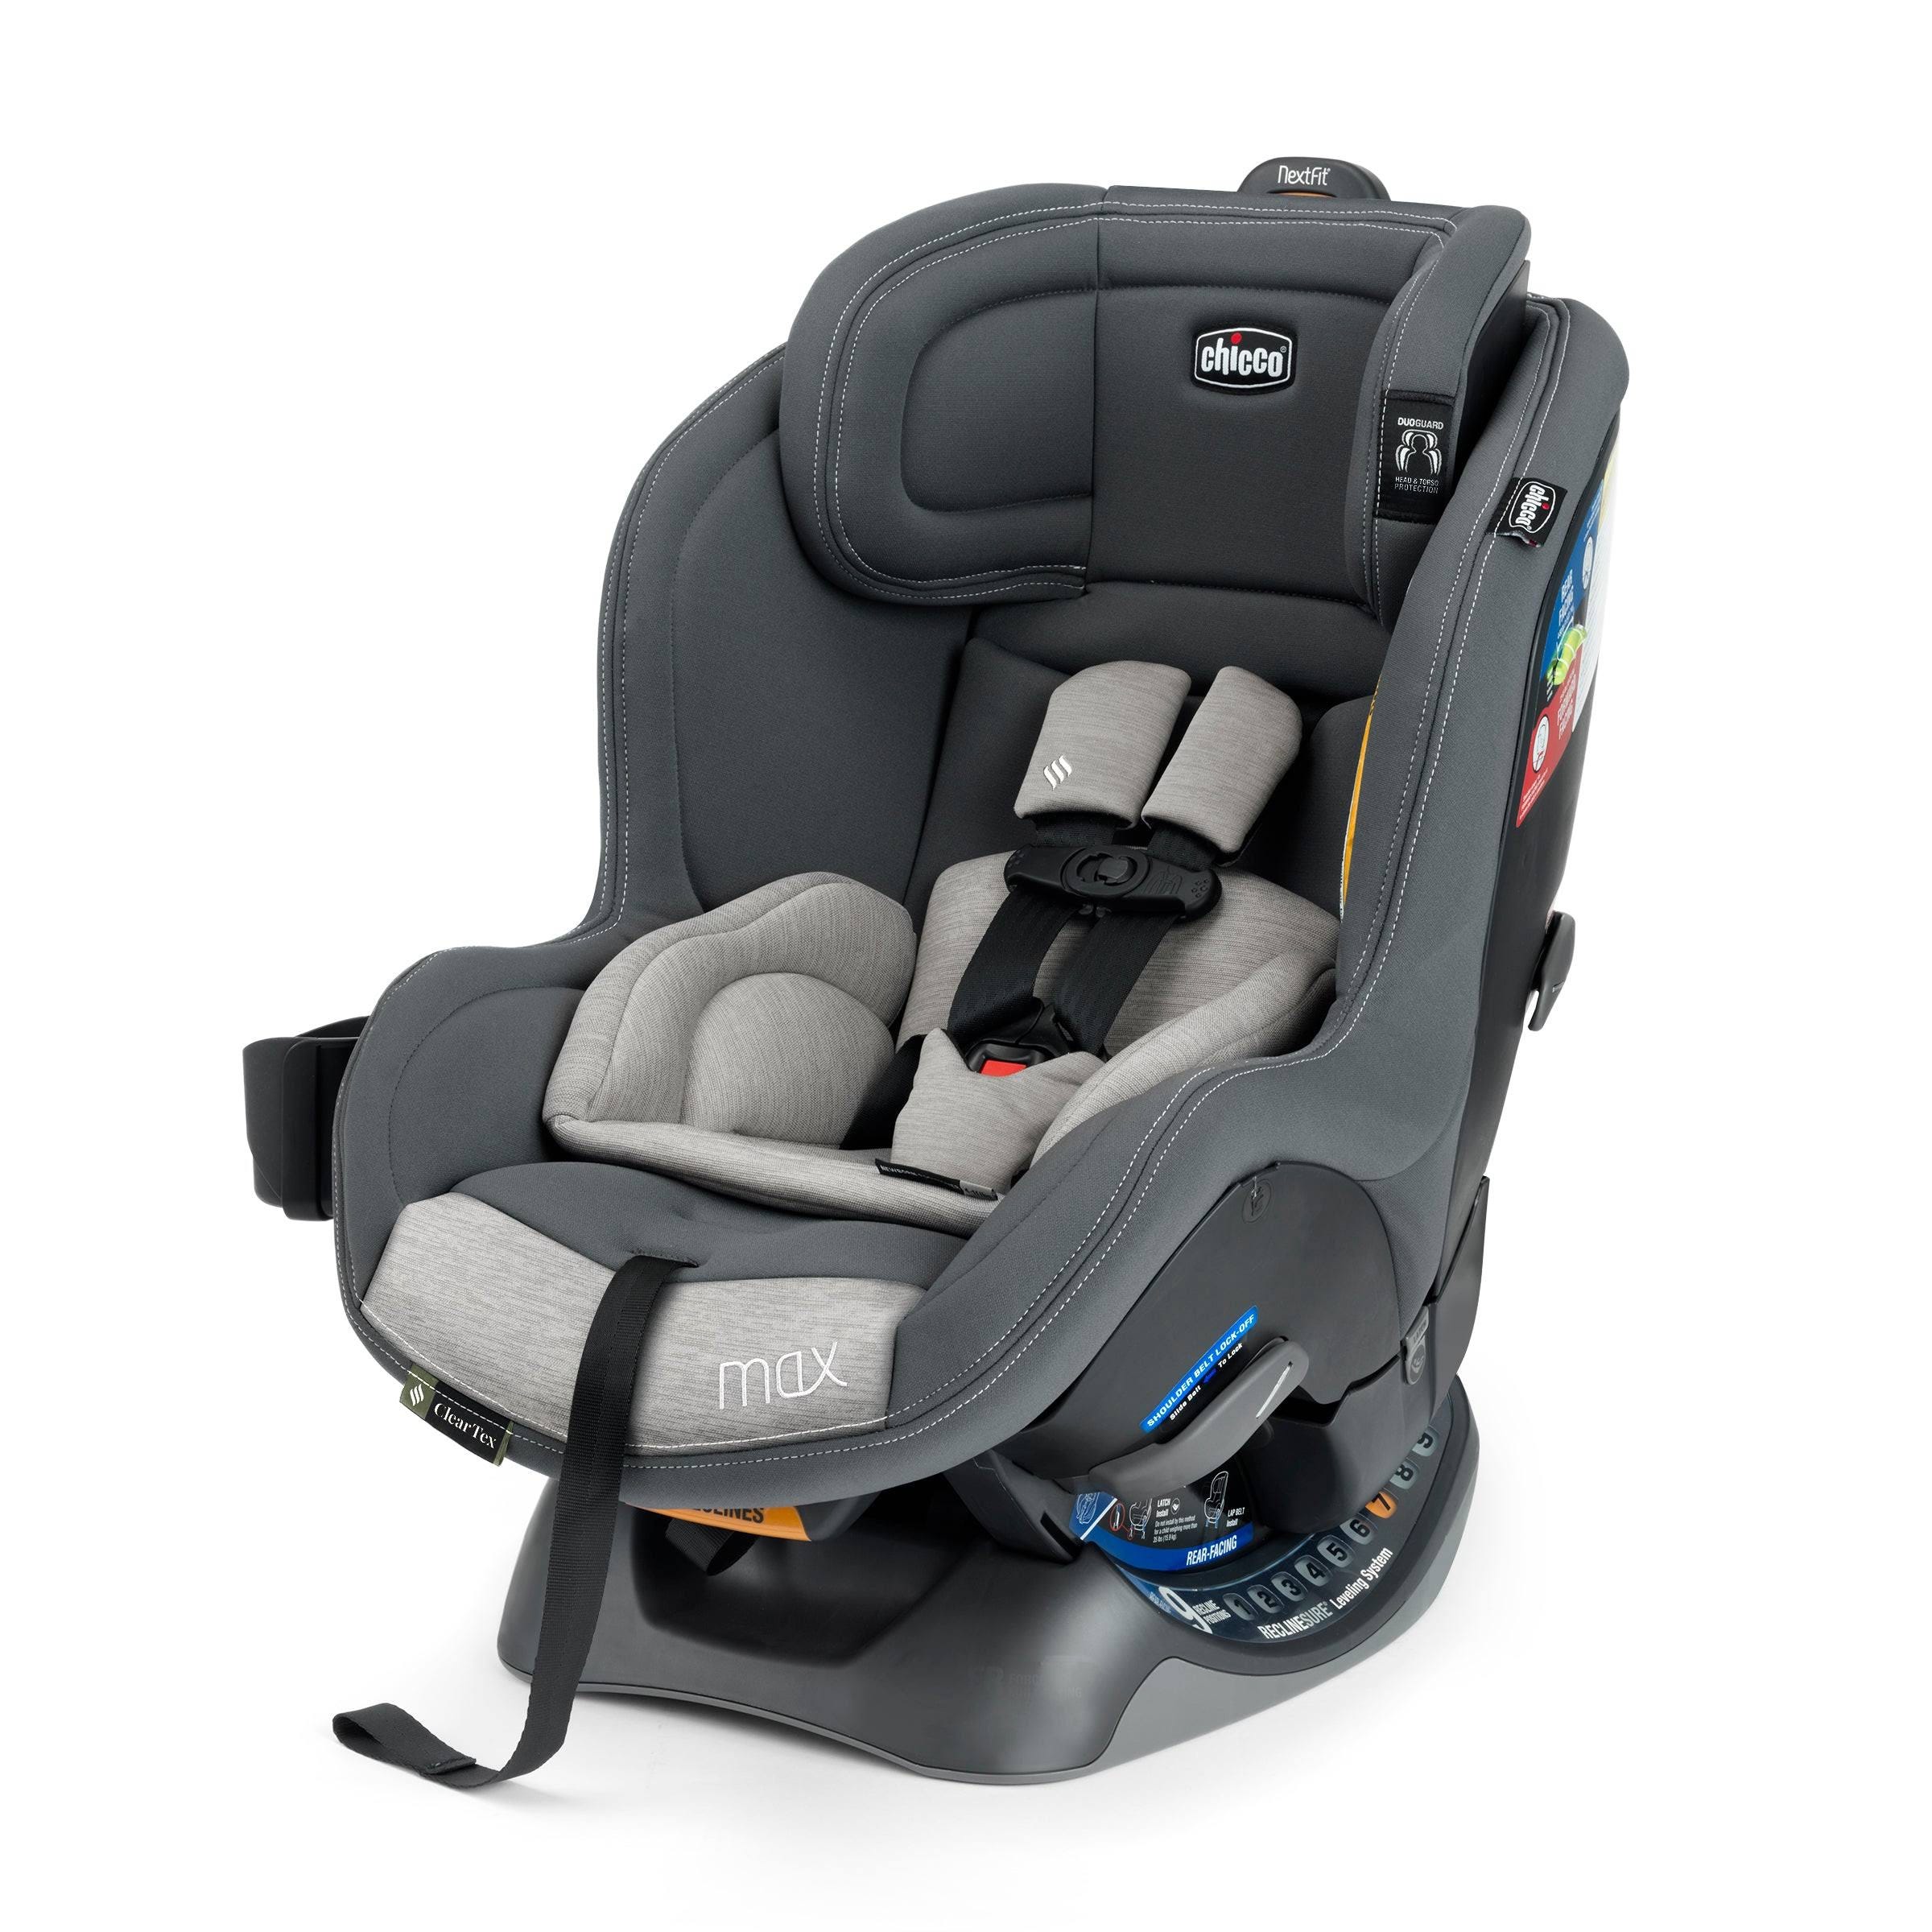 NextFit Max Cleartex Convertible Car Seat with 9-Position Headrest System and DuoGuard Protection | Image